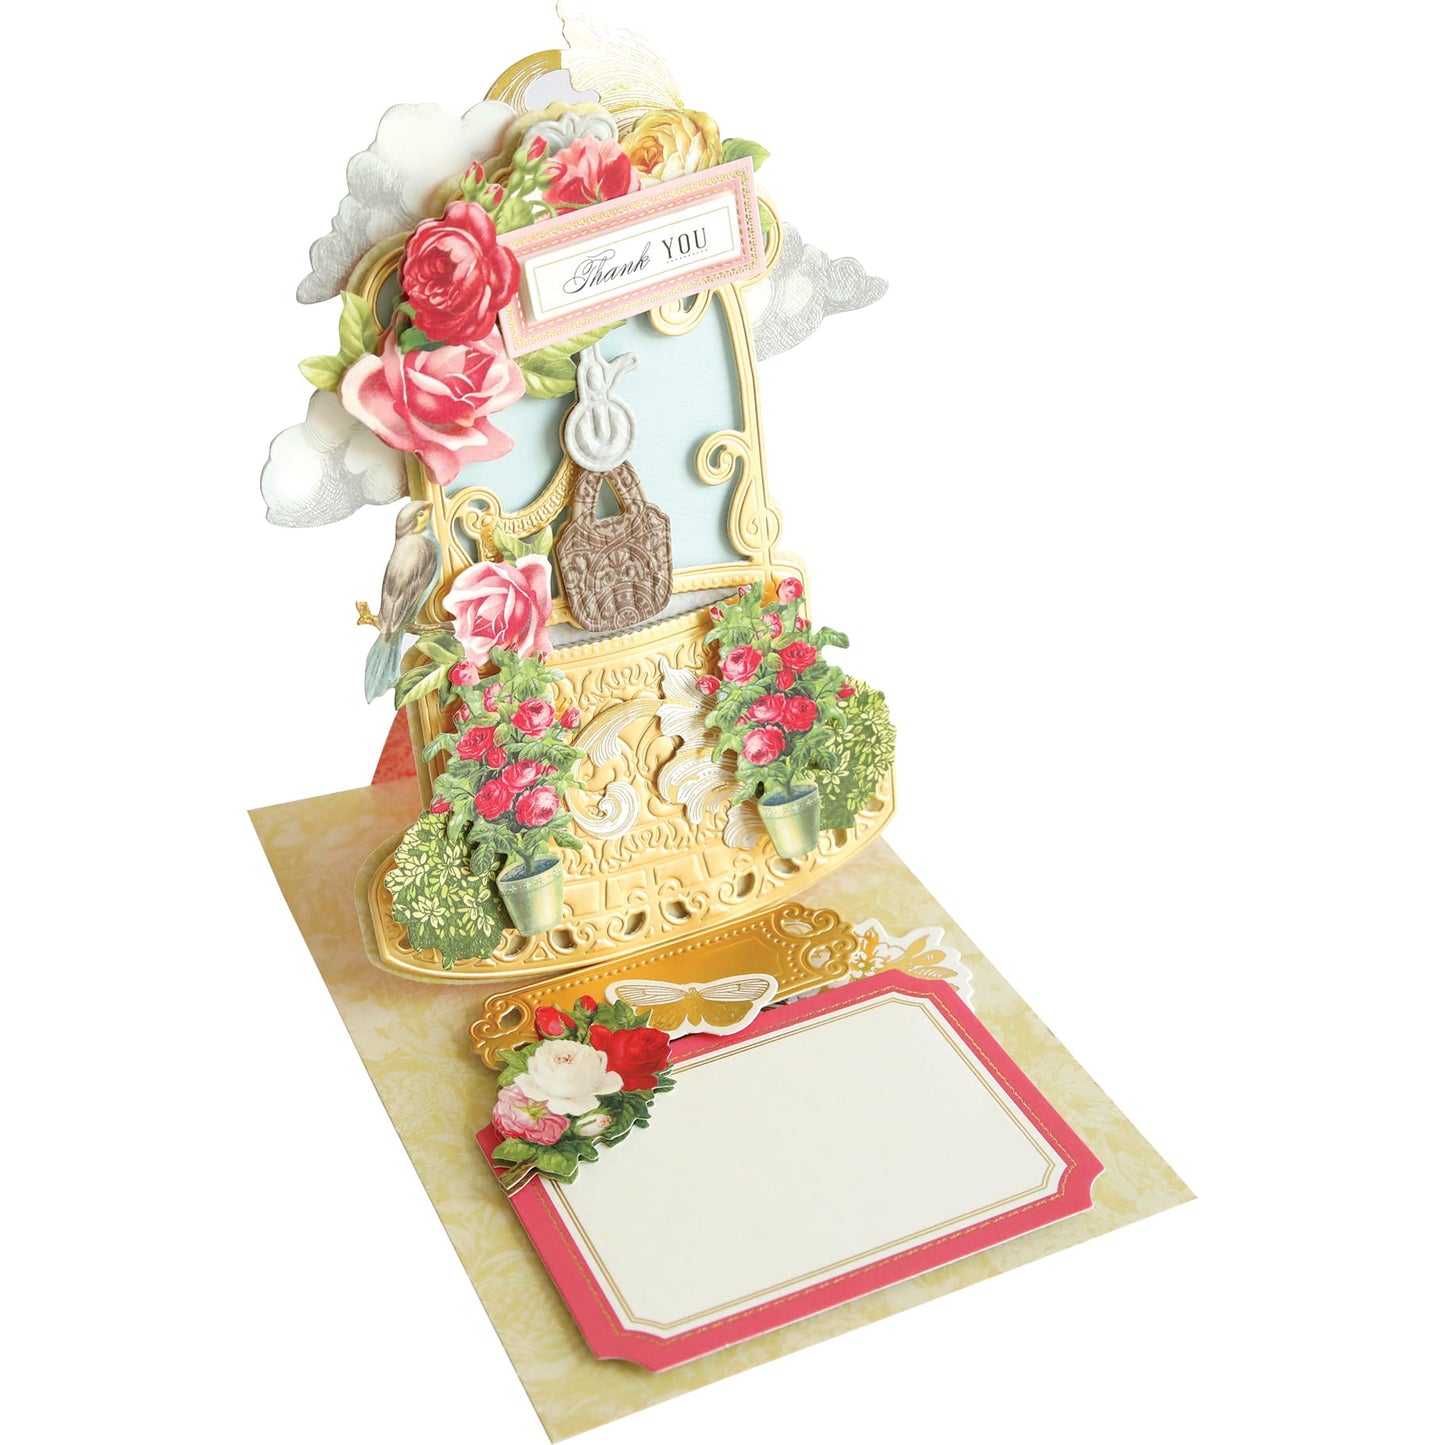 A Wishing Well Easel Finishing School Kit with roses and flowers on it.